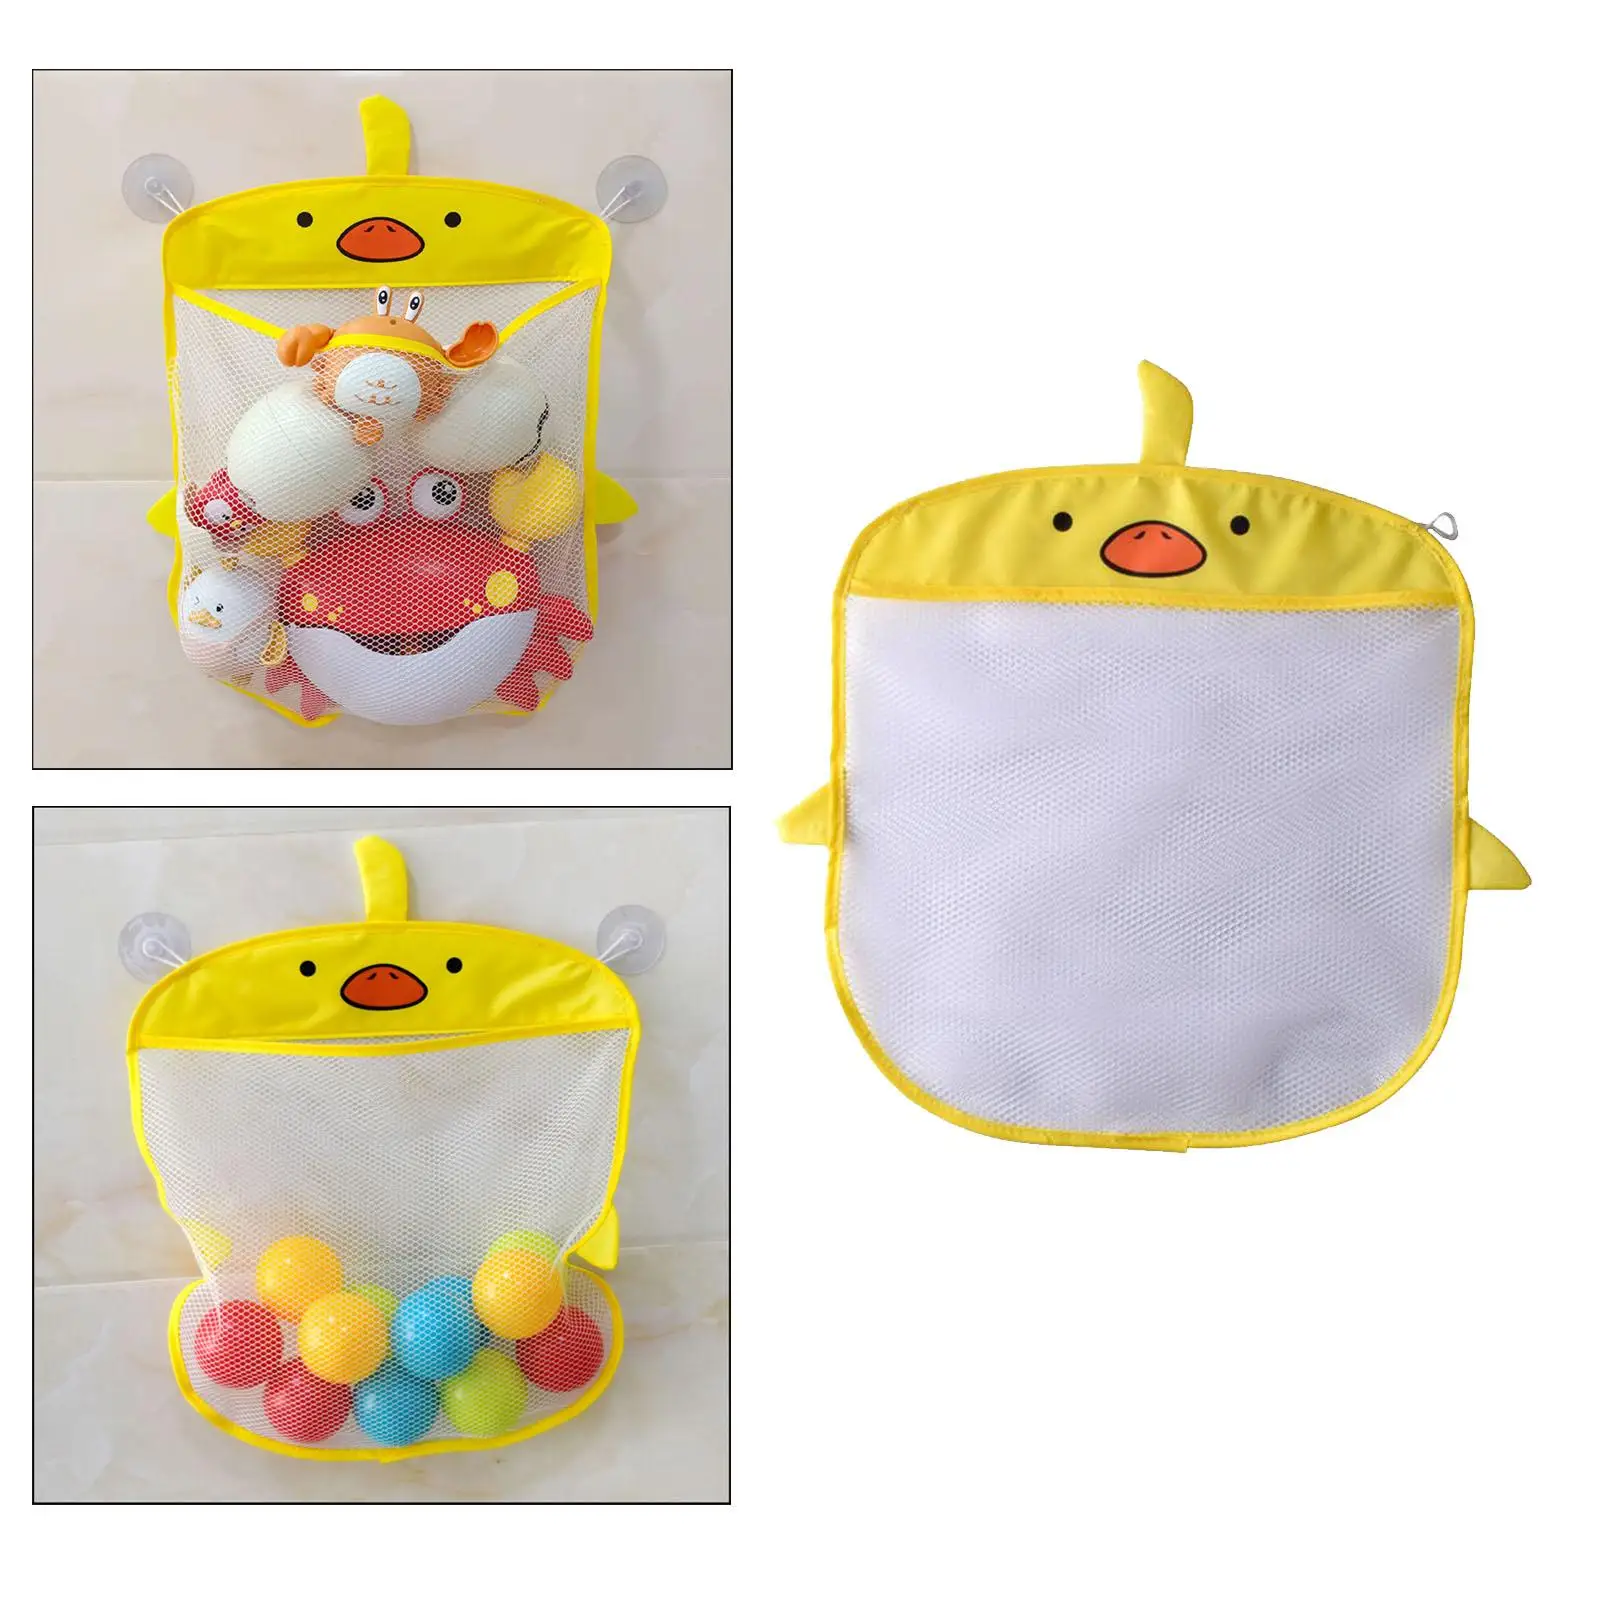 Hanging Toy Storage Mesh Bag Mesh Beach Bag with Suction Cups Quick Drying Toy Organizer Mesh Bag for Boys Girls Toddlers Baby